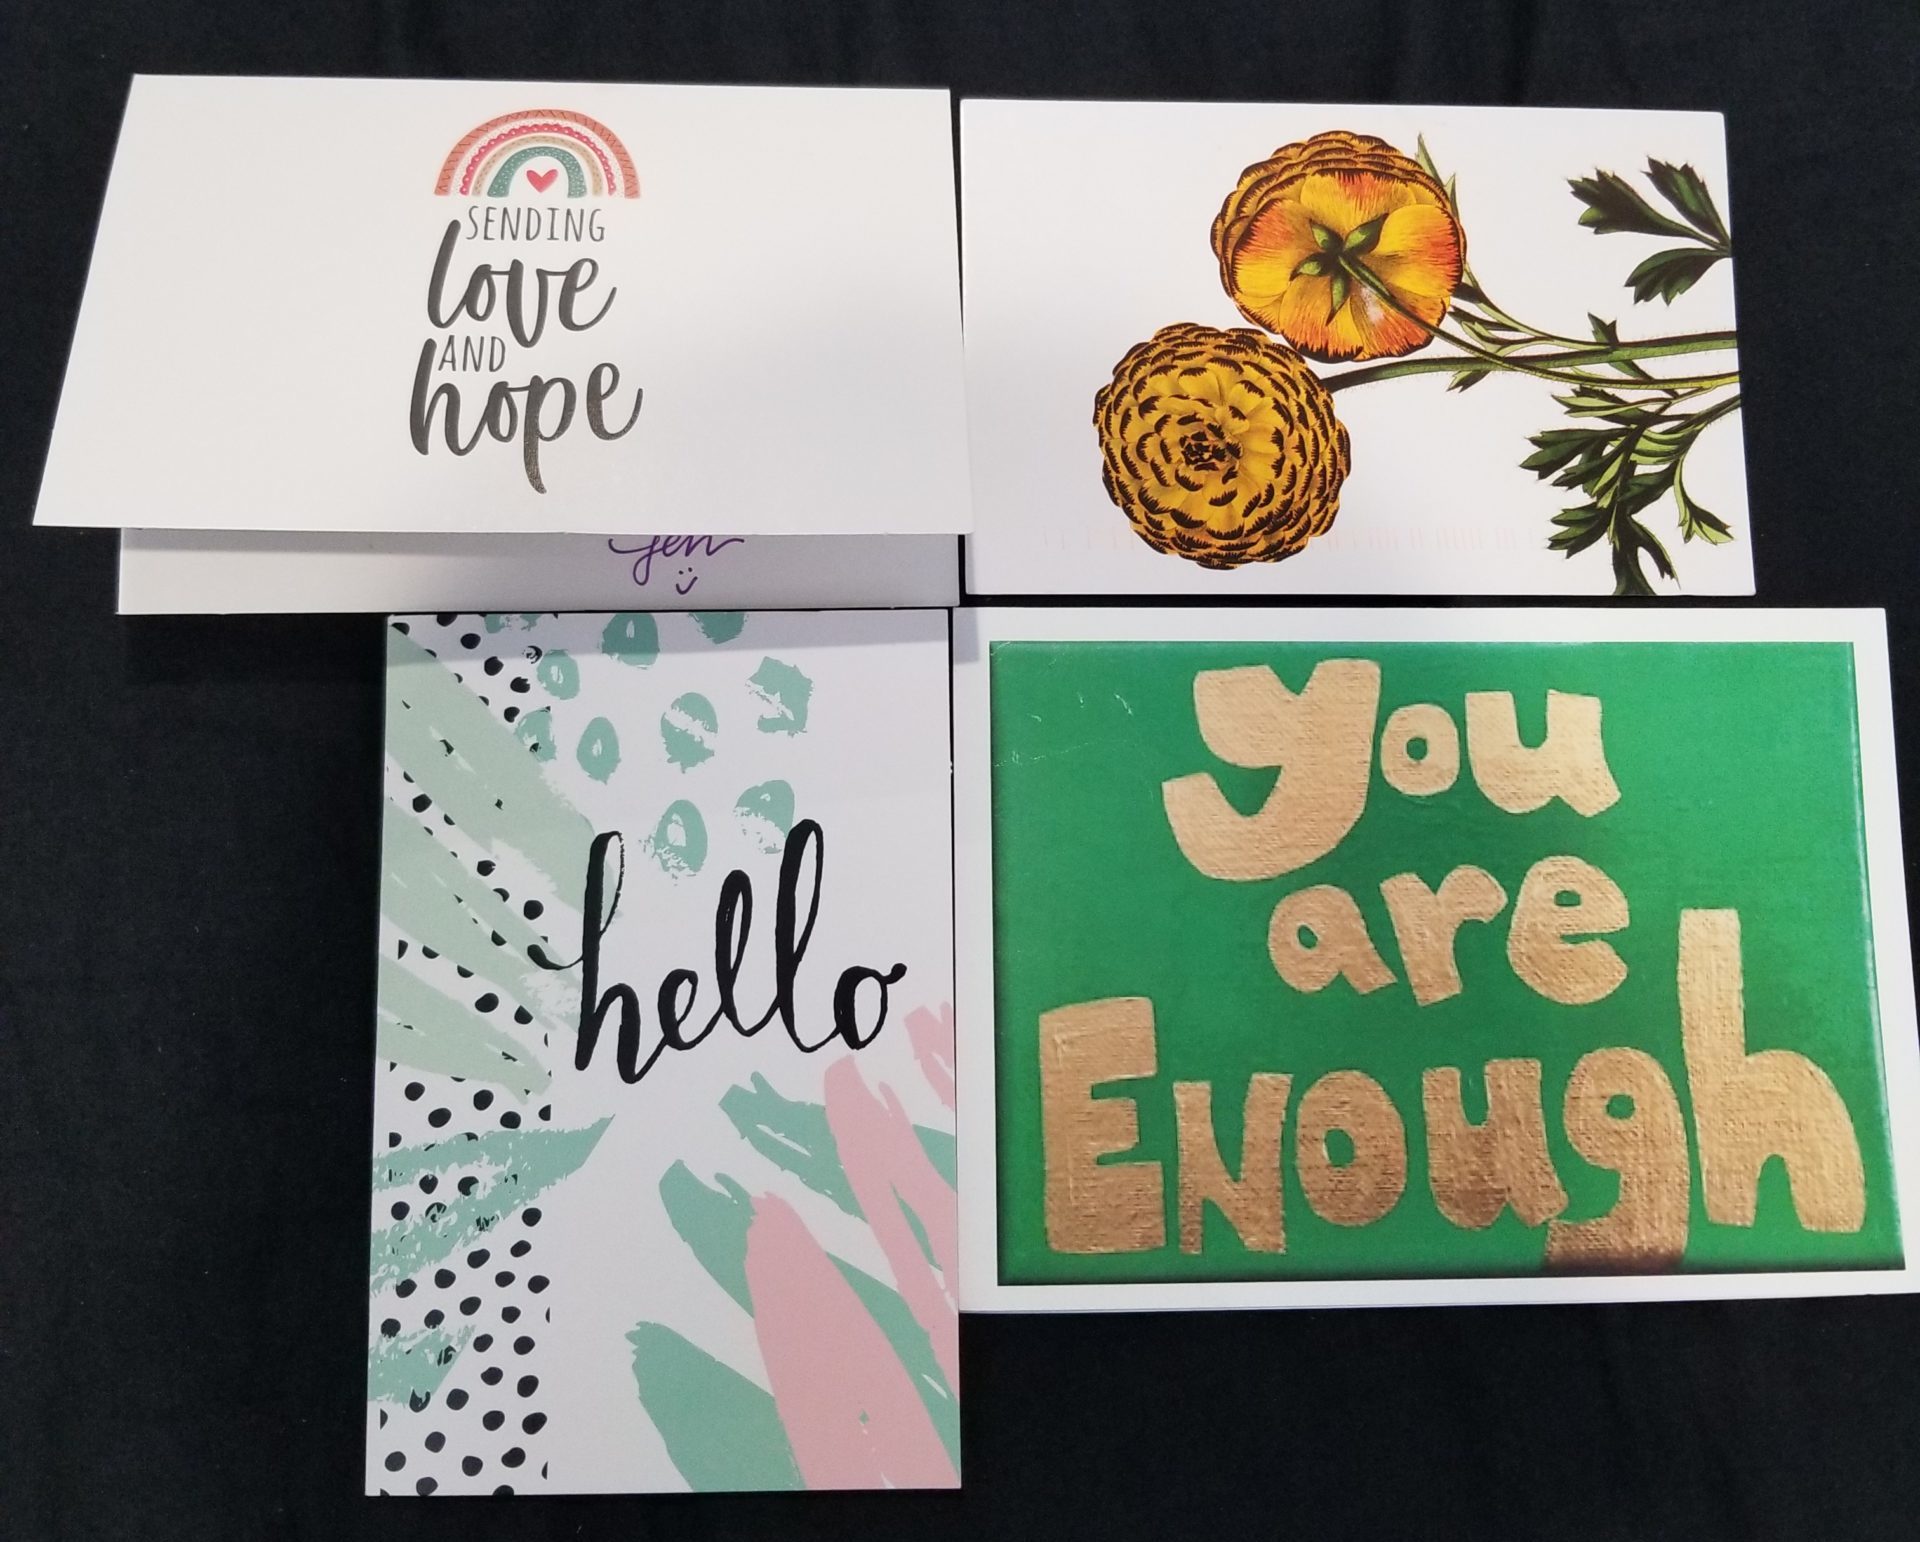 Four greeting cards